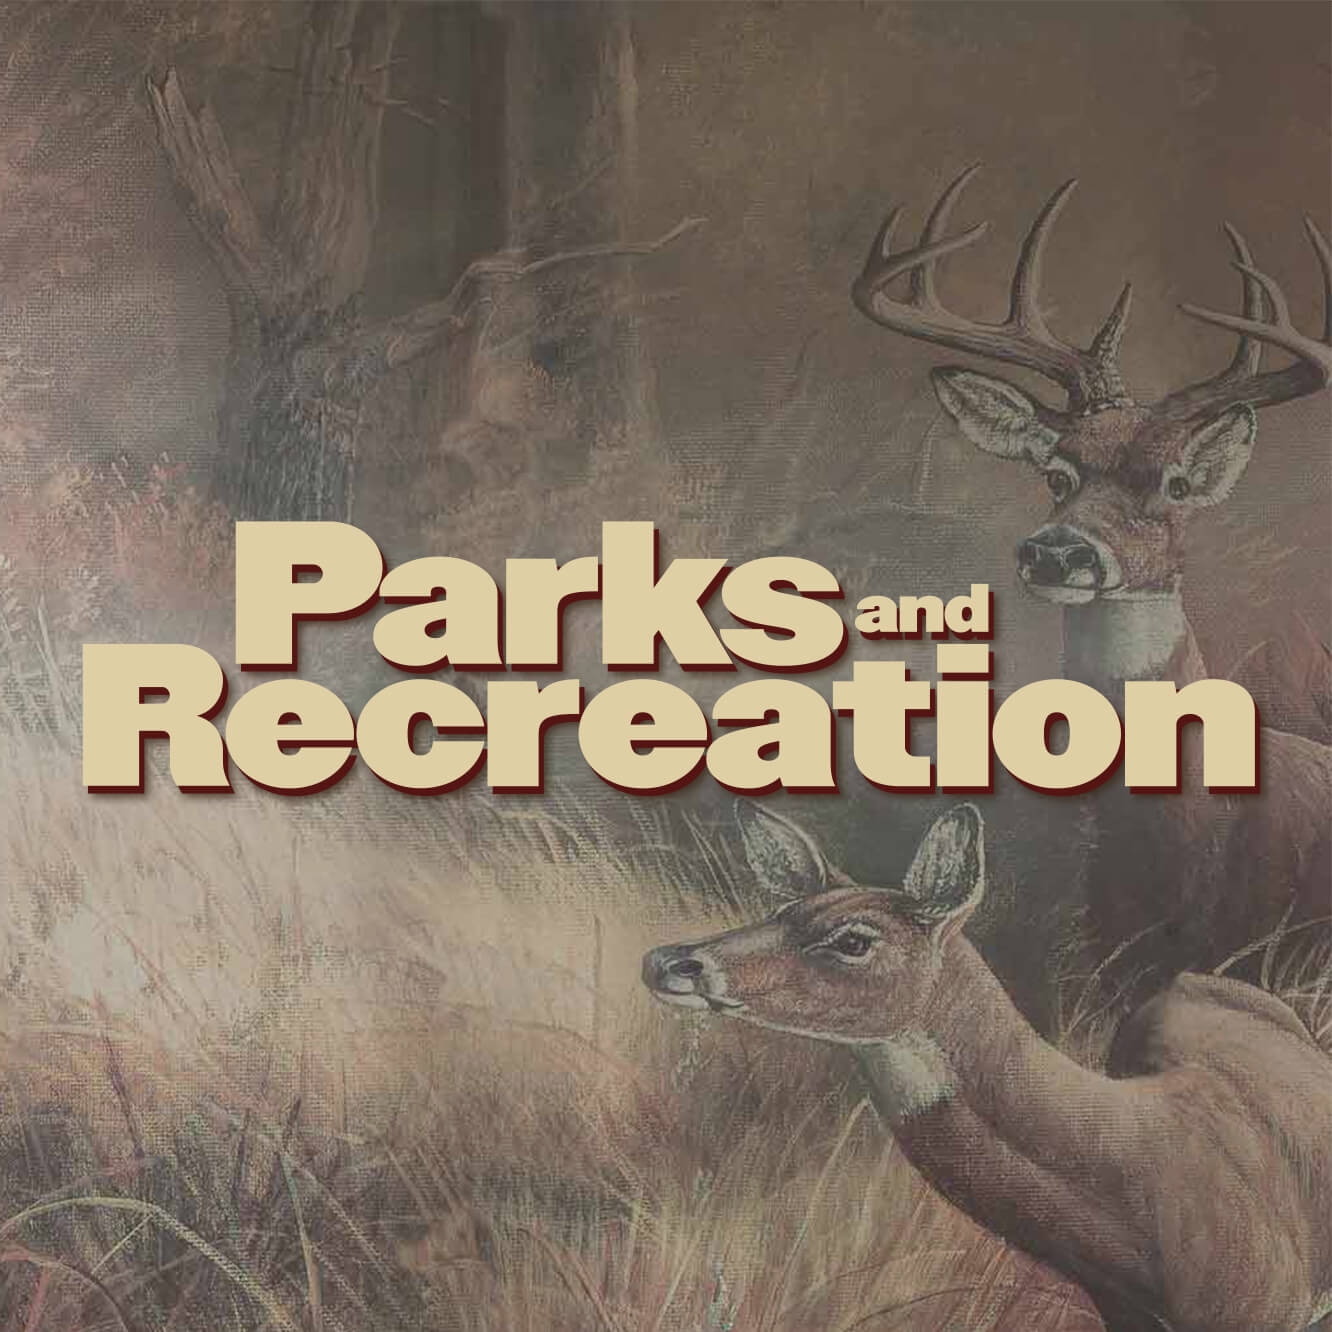 Parks-and-Recreation-license2.jpg